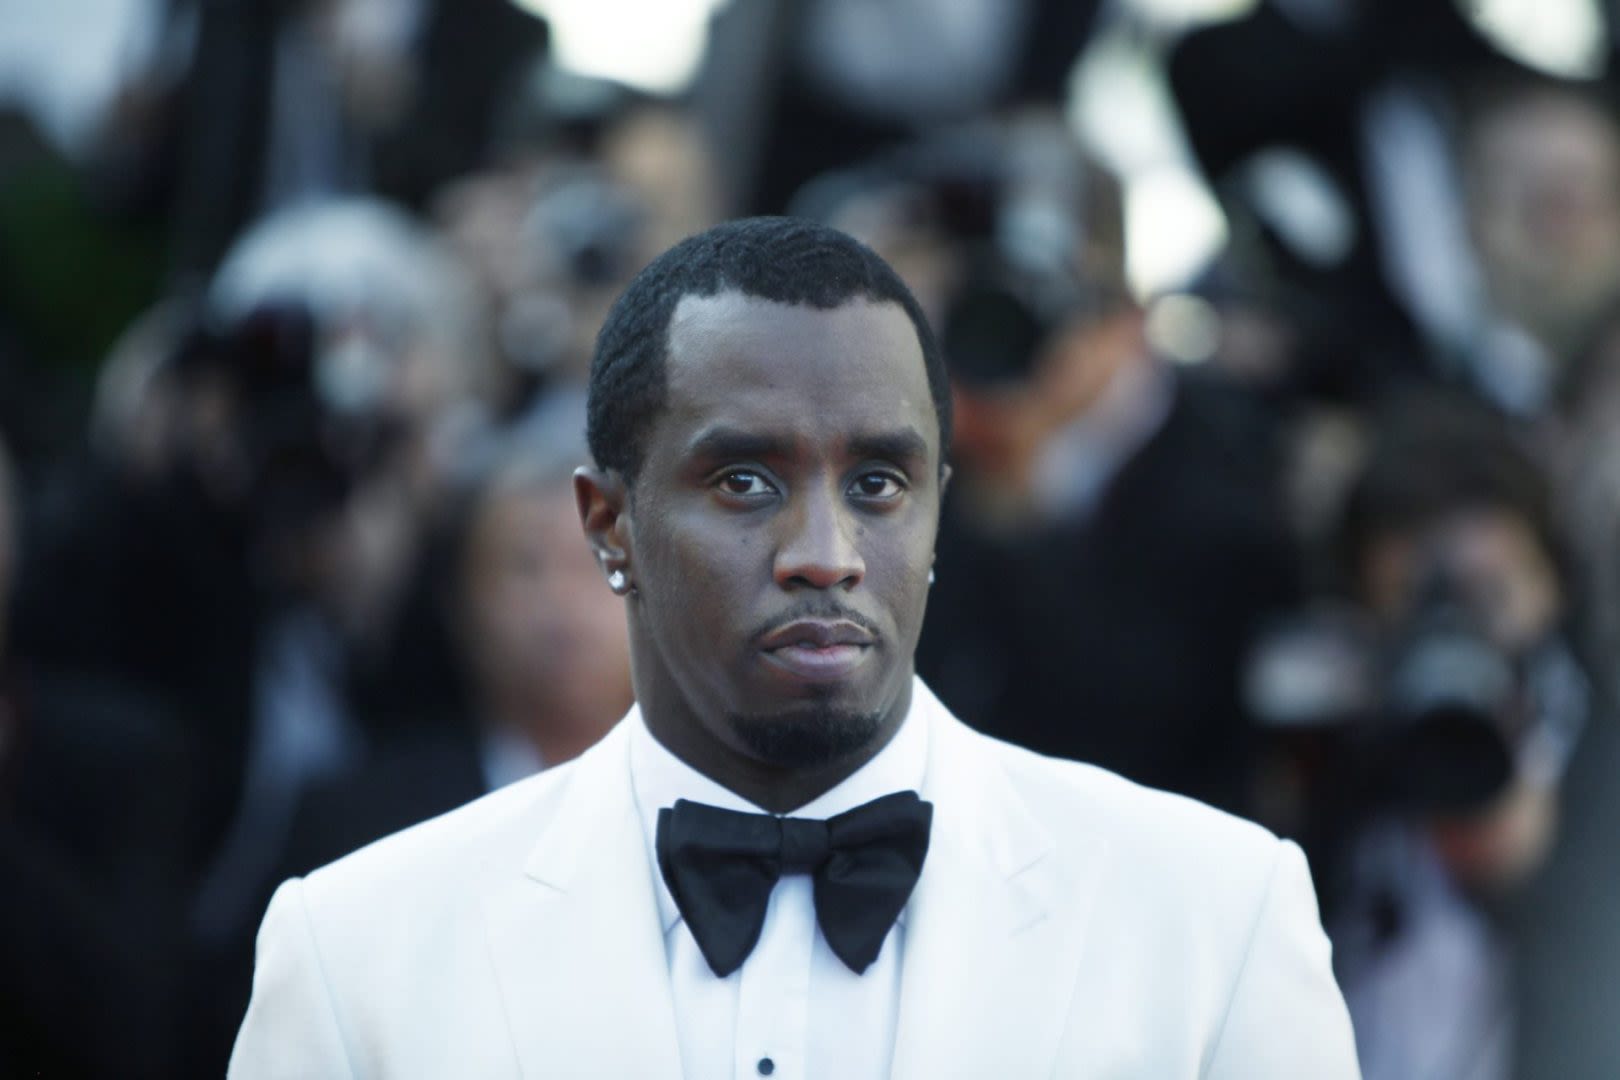 Diddy angry video was released, says doesn't tell the story